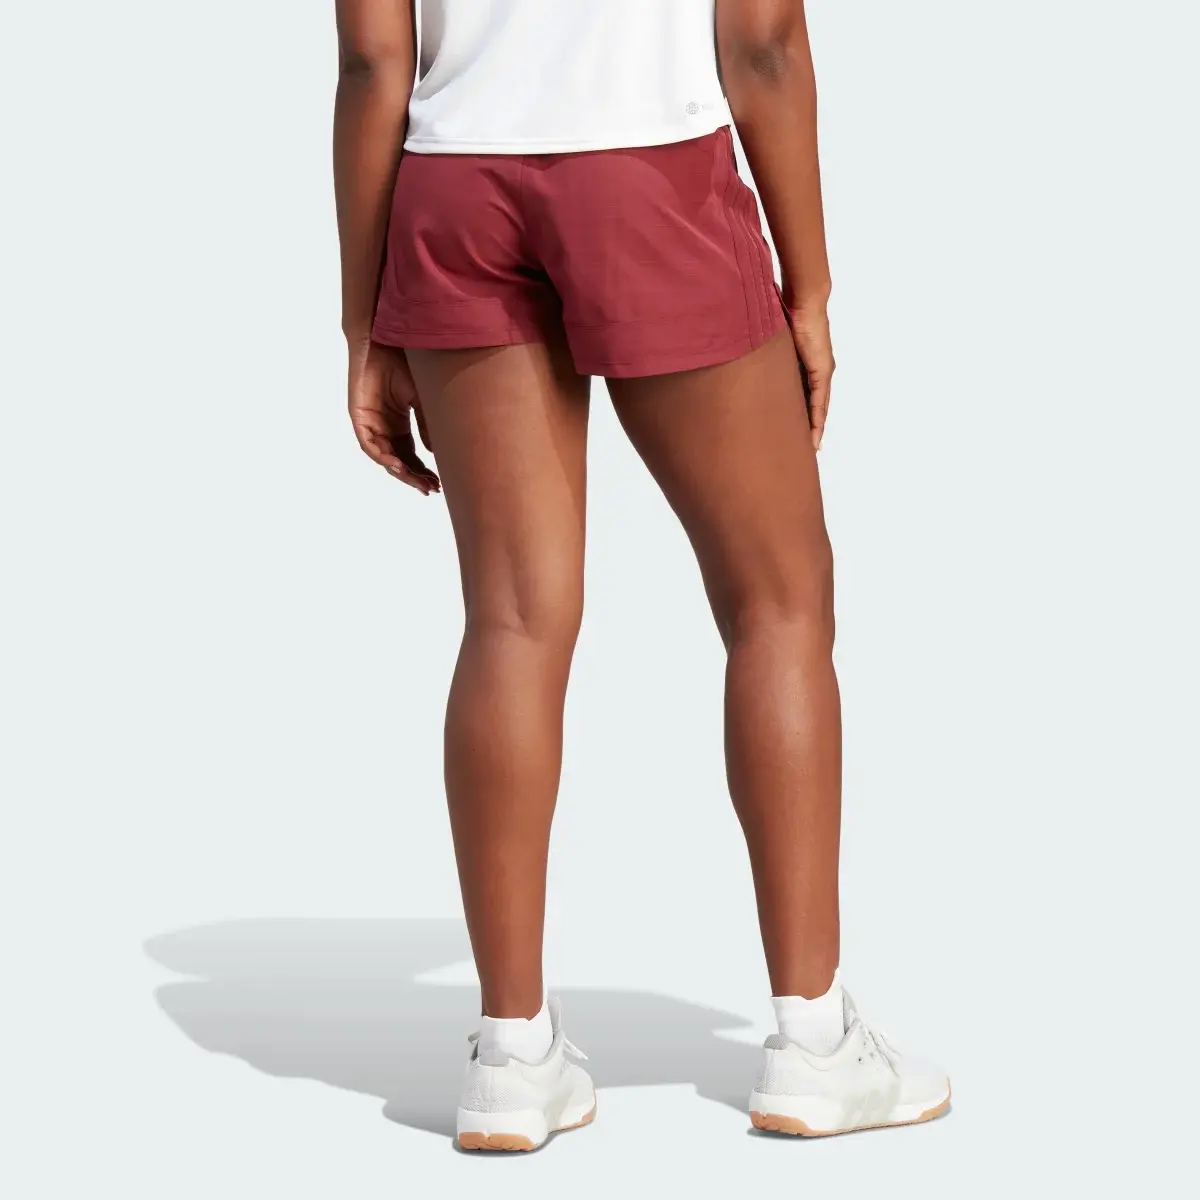 Adidas Pacer 3-Stripes Woven Heather Shorts. 2